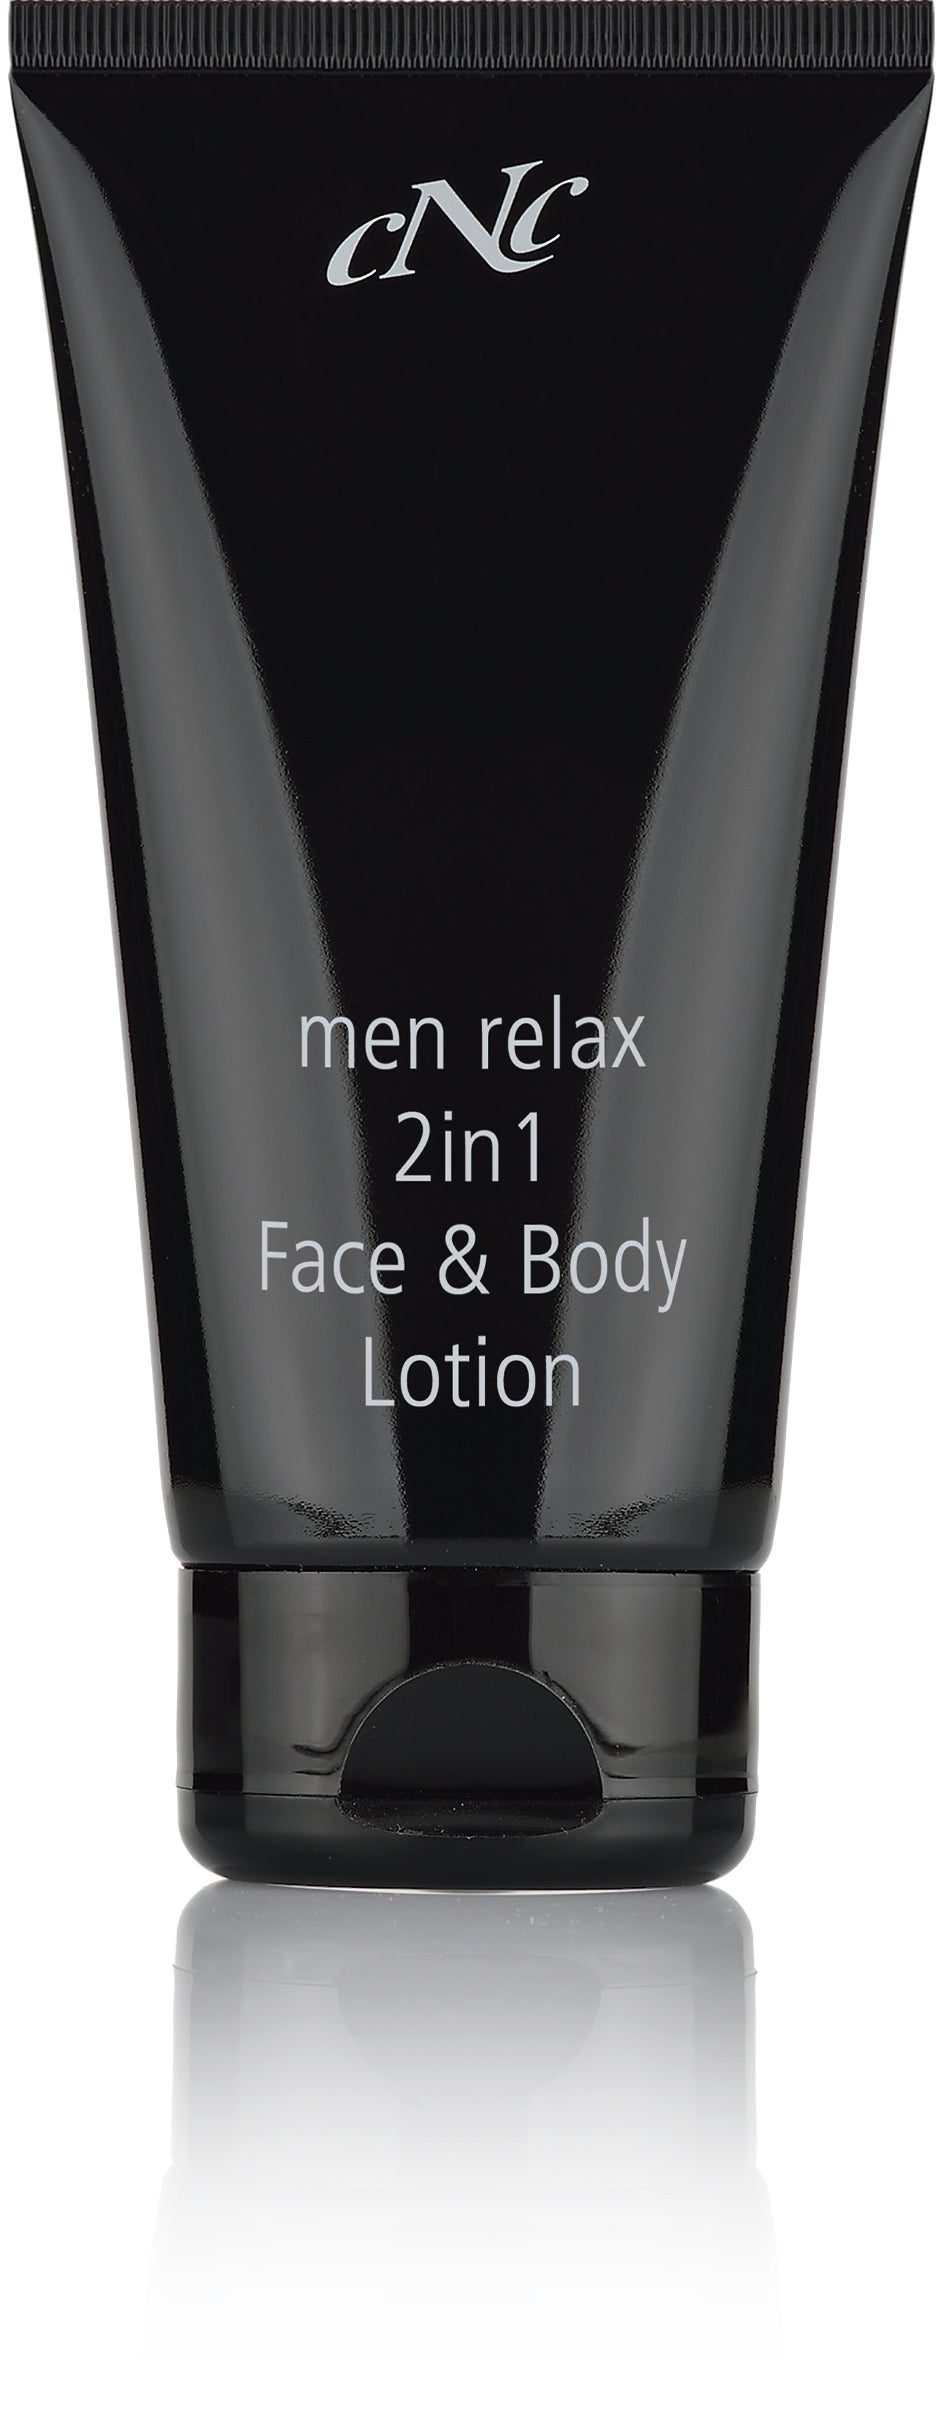 men relax 2in1 Face & Body Lotion, 150 ml